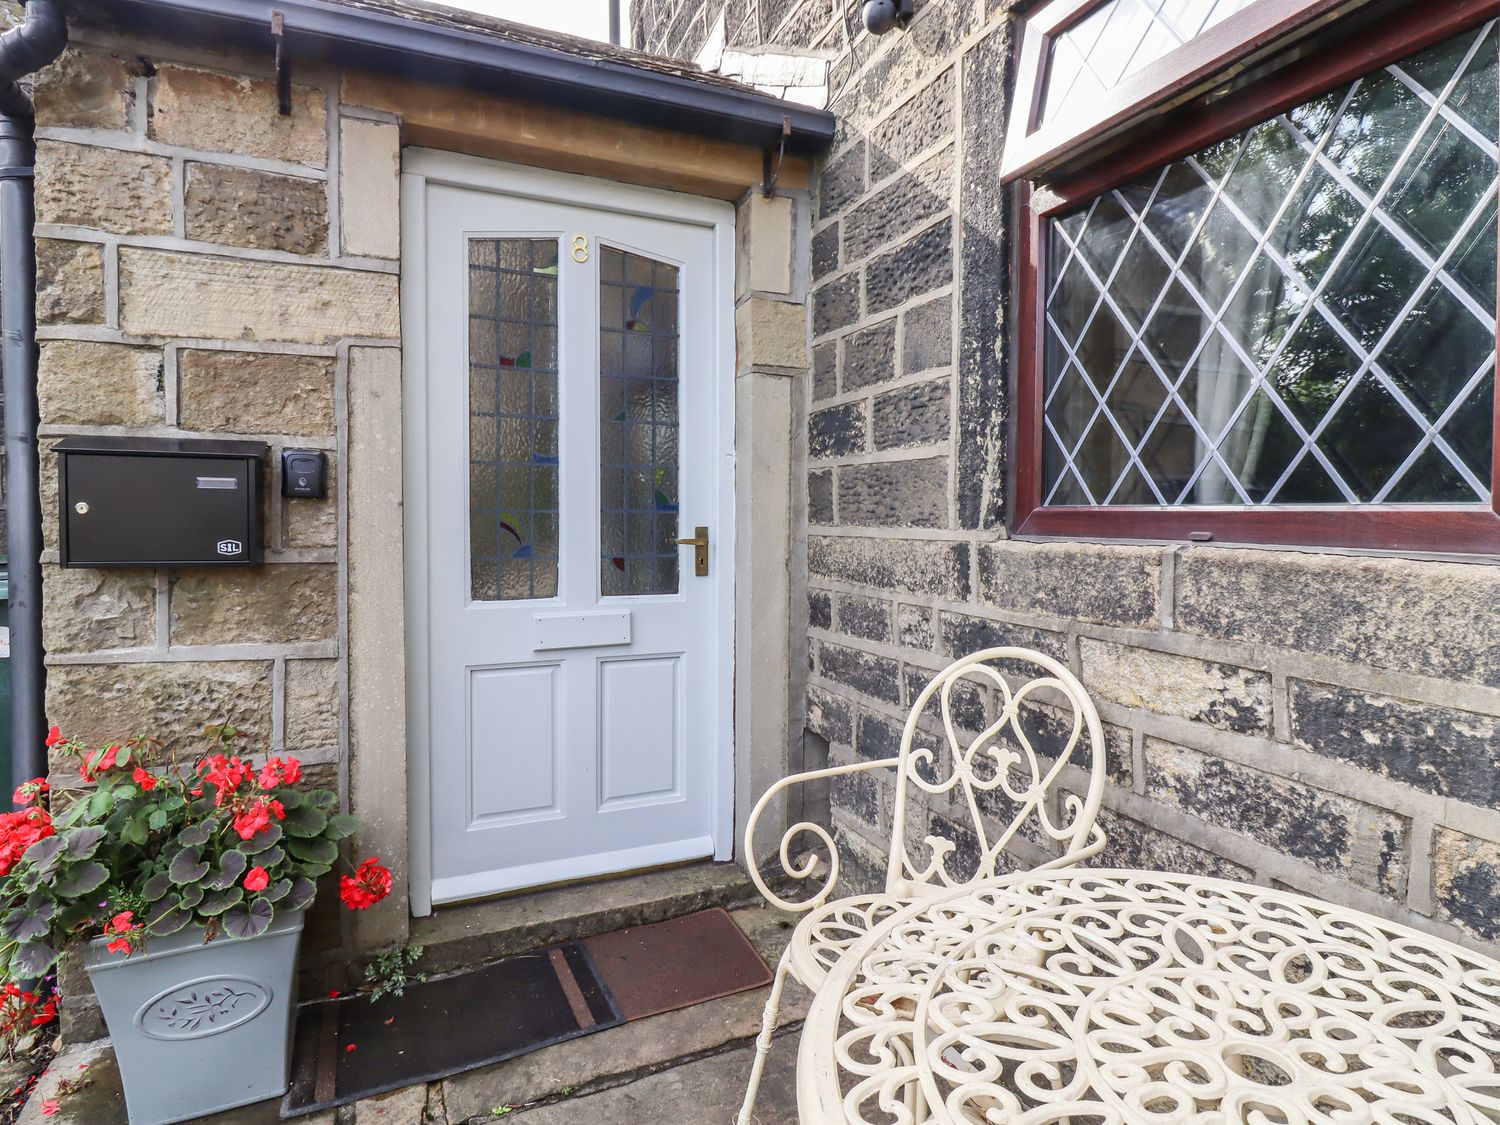 8 Lune Street - Yorkshire Dales - 1091714 - photo 1